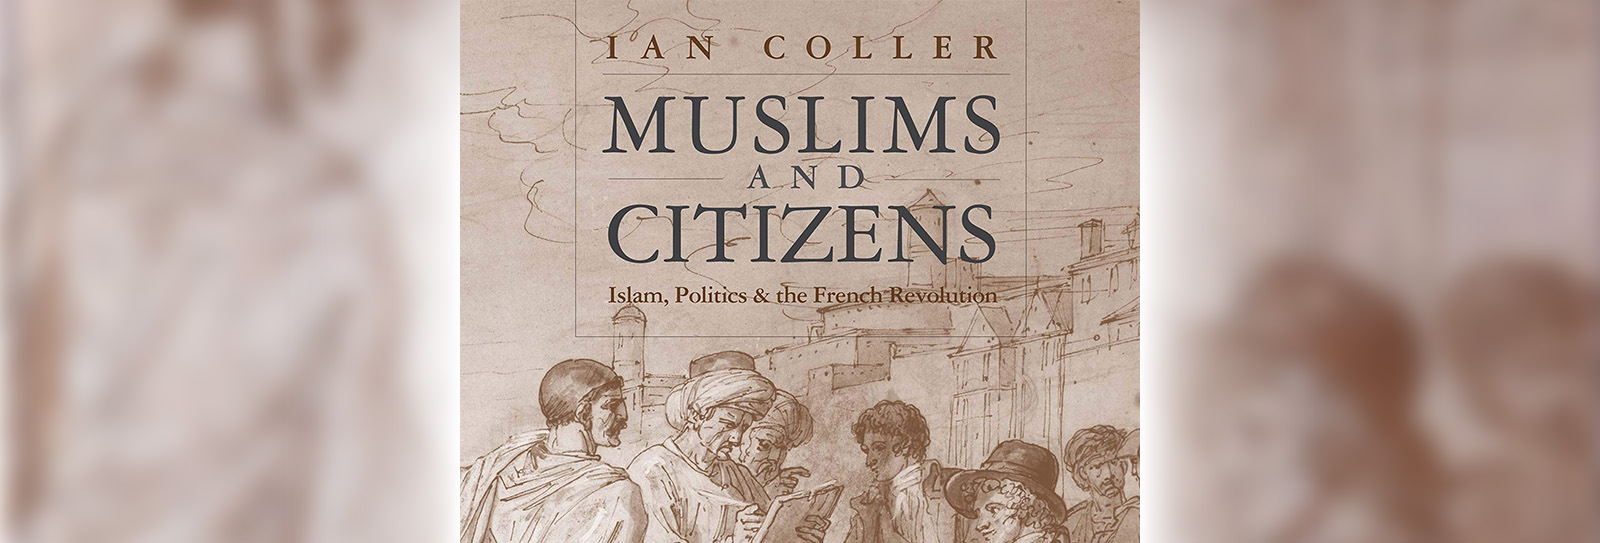 Muslim Perspectives on European Connections: A Conversation with Historian Ian Coller